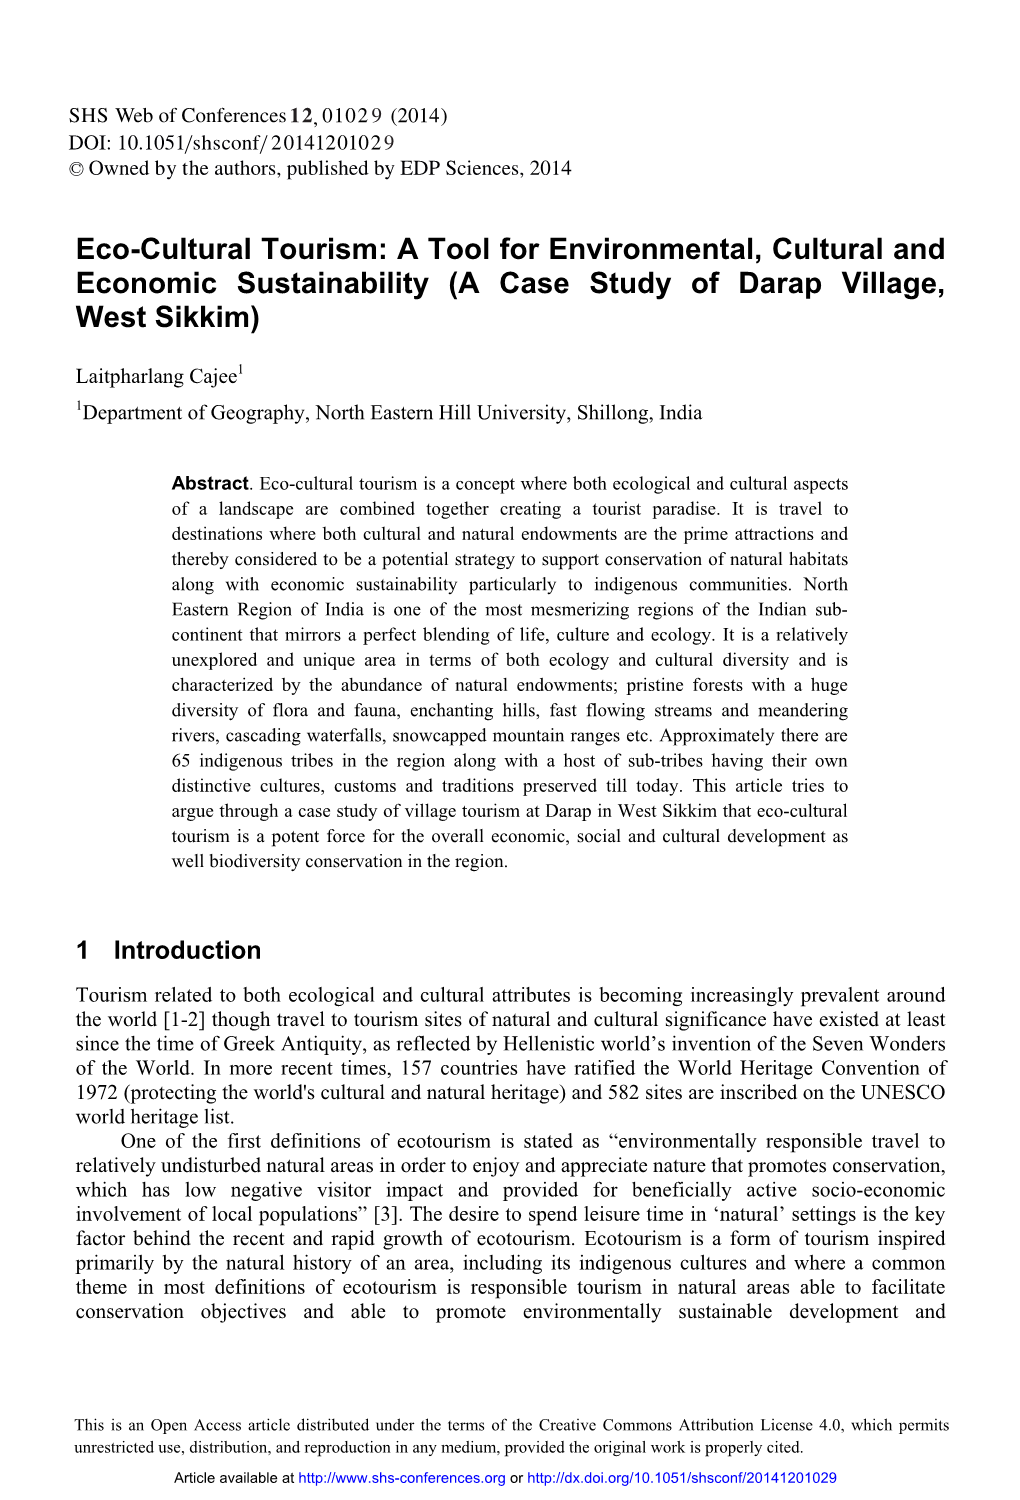 Eco-Cultural Tourism: a Tool for Environmental, Cultural and Economic Sustainability (A Case Study of Darap Village, West Sikkim)